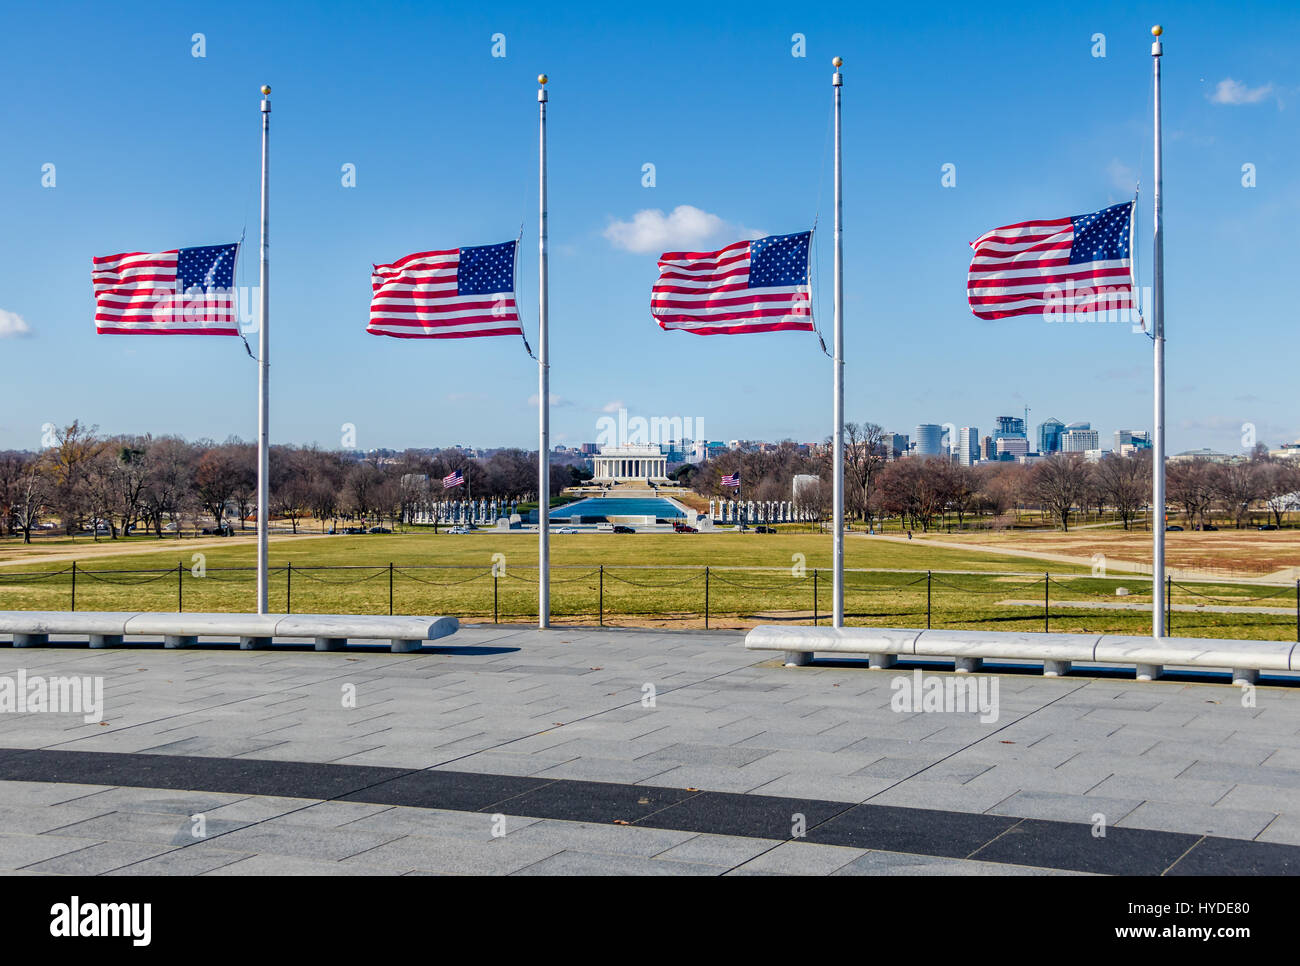 American Flags with Lincoln Memorial on background - Washington, D.C., USA Stock Photo